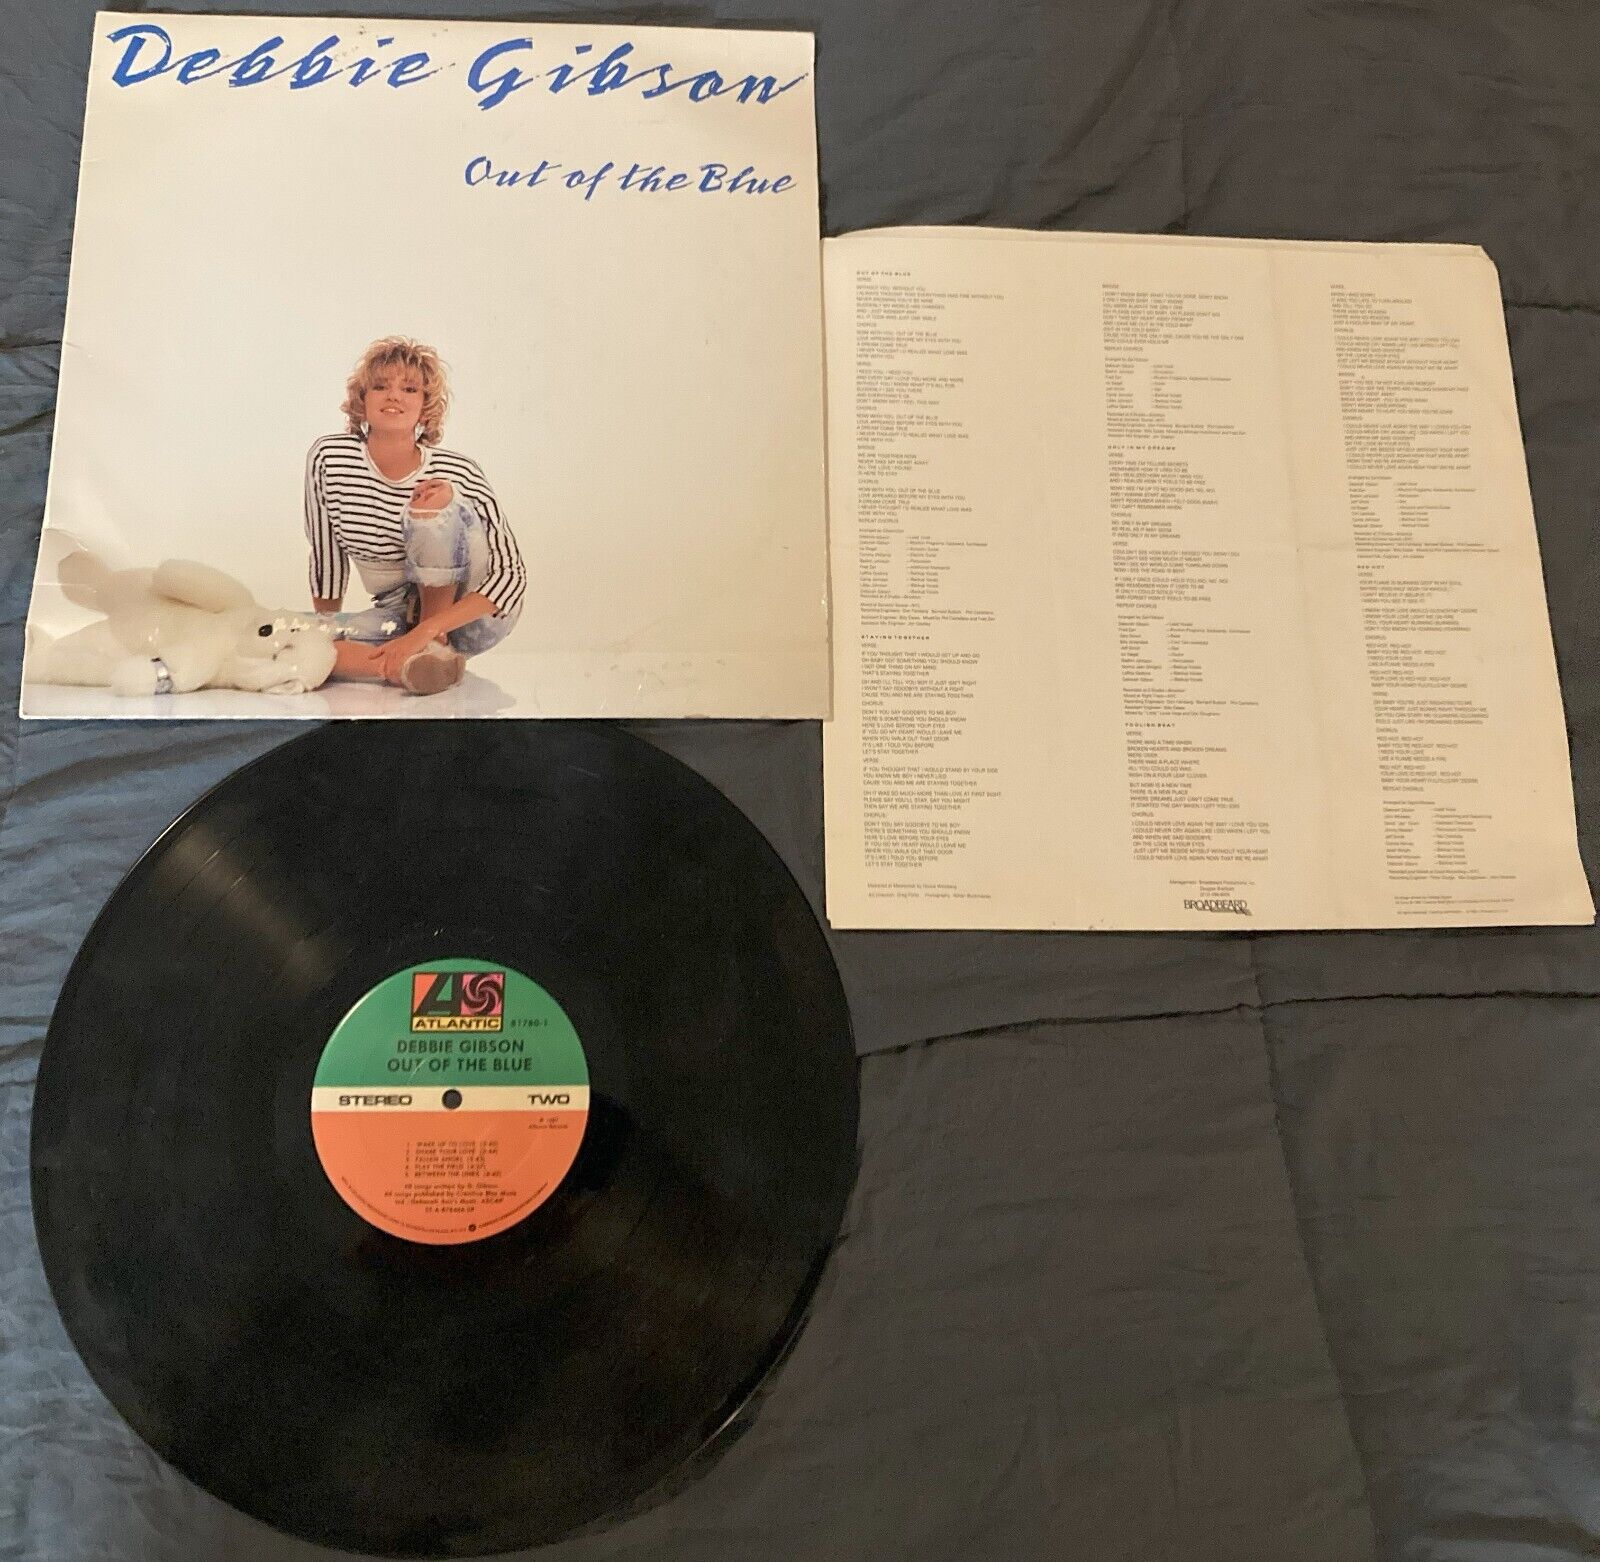 Debbie Gibson Lp Out Of The Blue On Atlantic